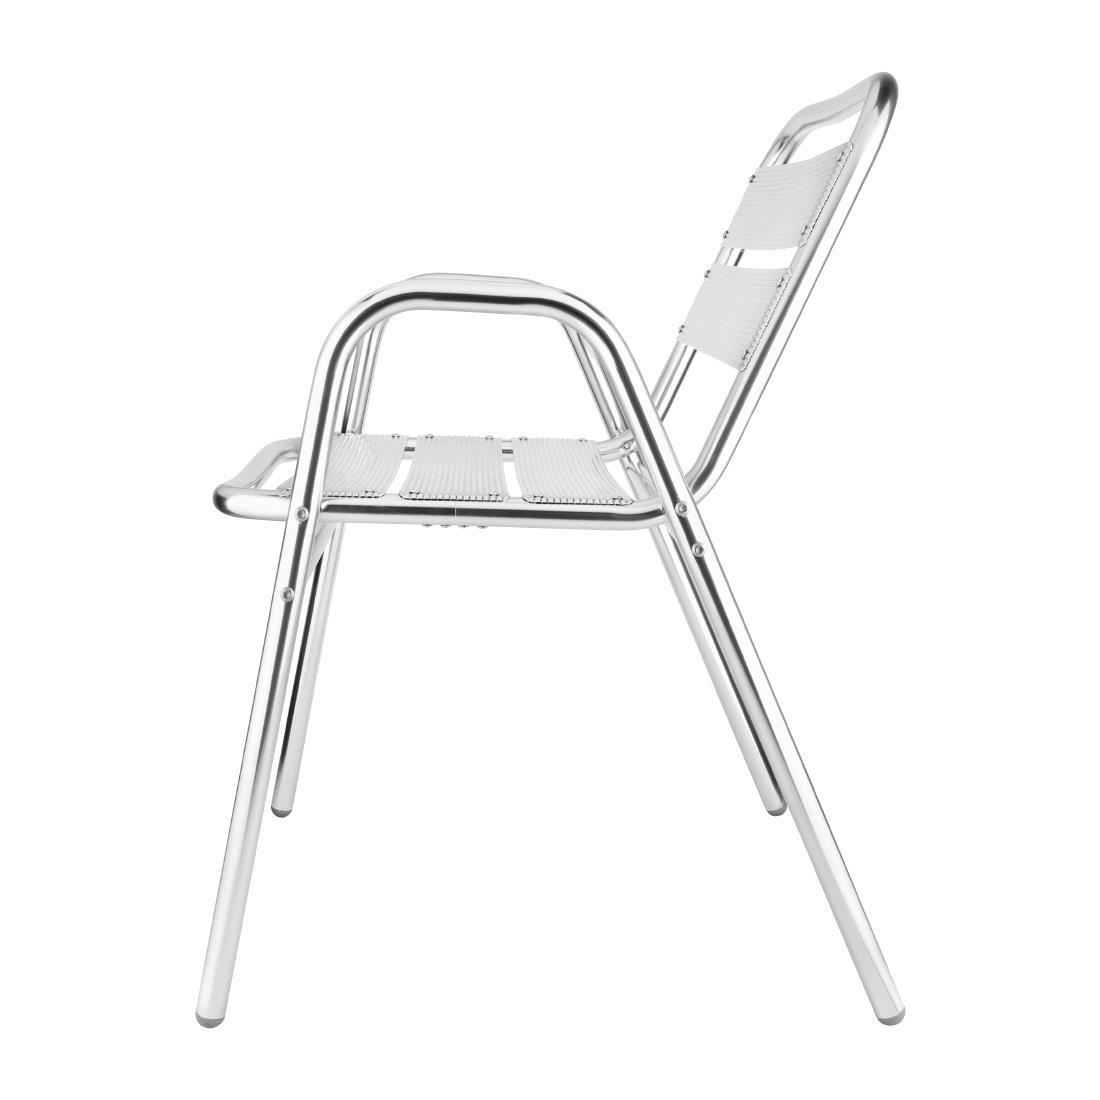 Bolero Aluminium Stacking Chairs Arched Arms (Pack of 4) - U501  - 2